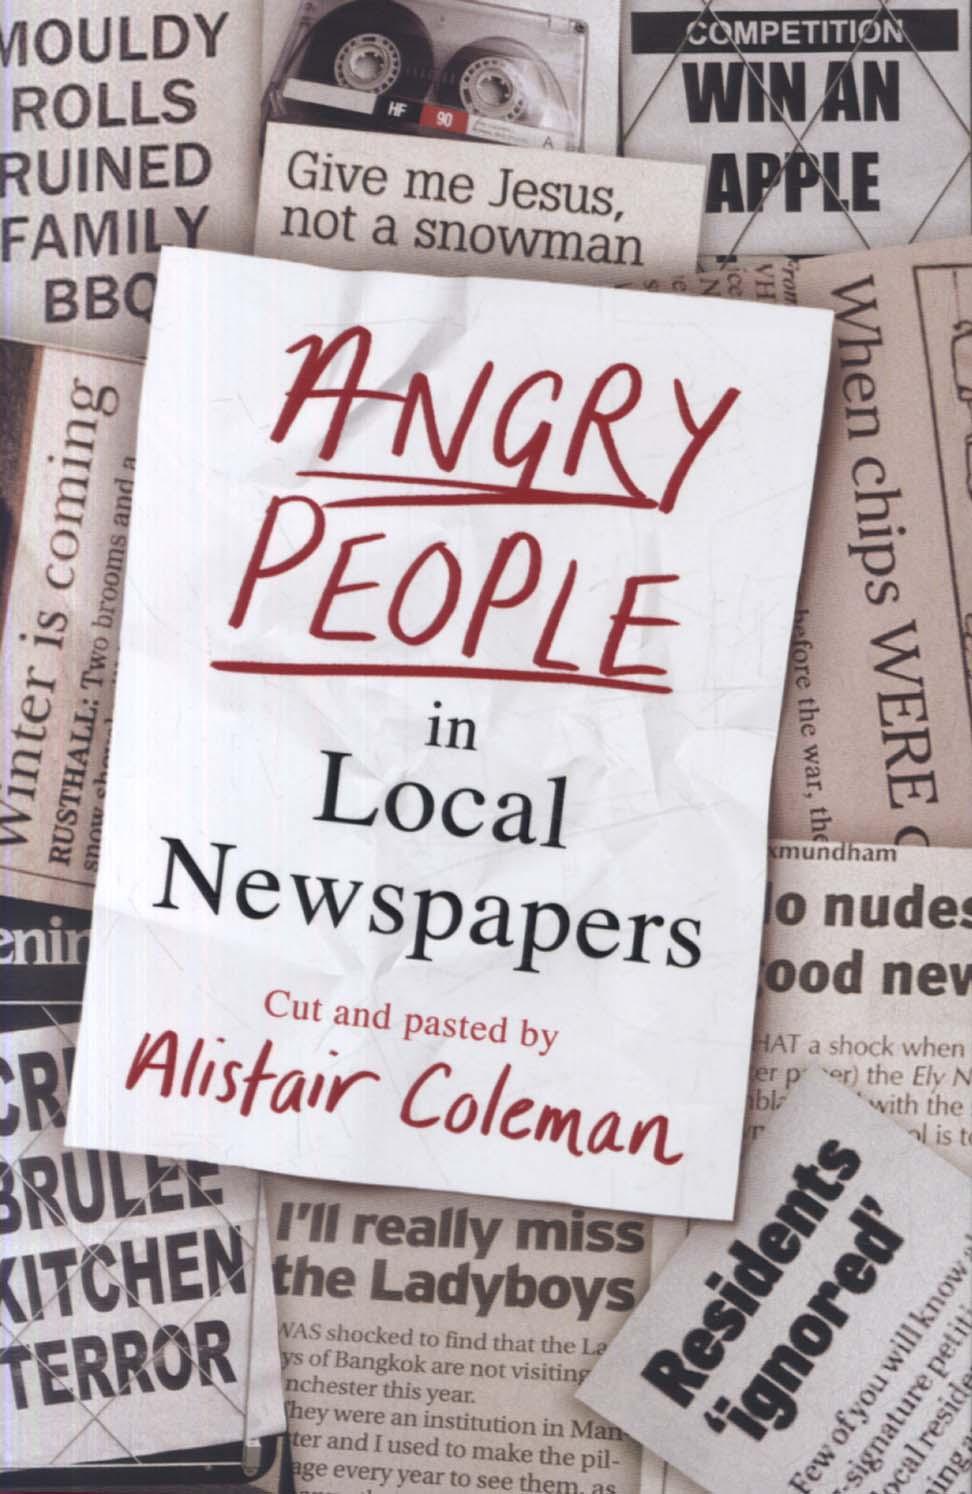 Angry People in Local Newspapers